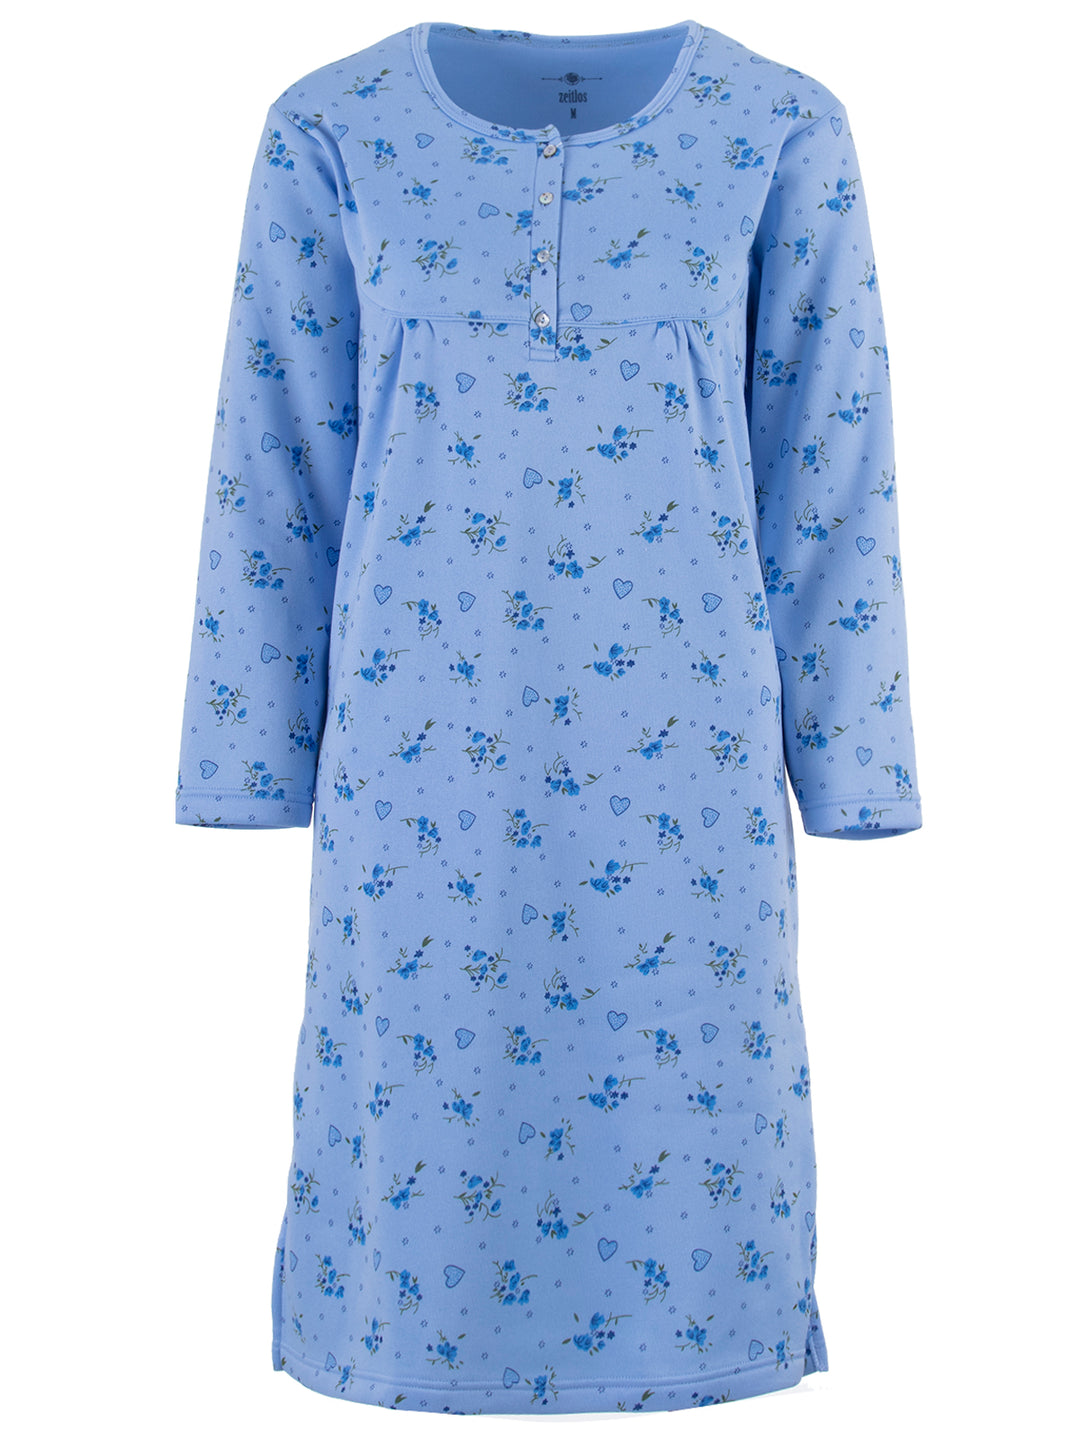 Thermal nightgown - heart flowers